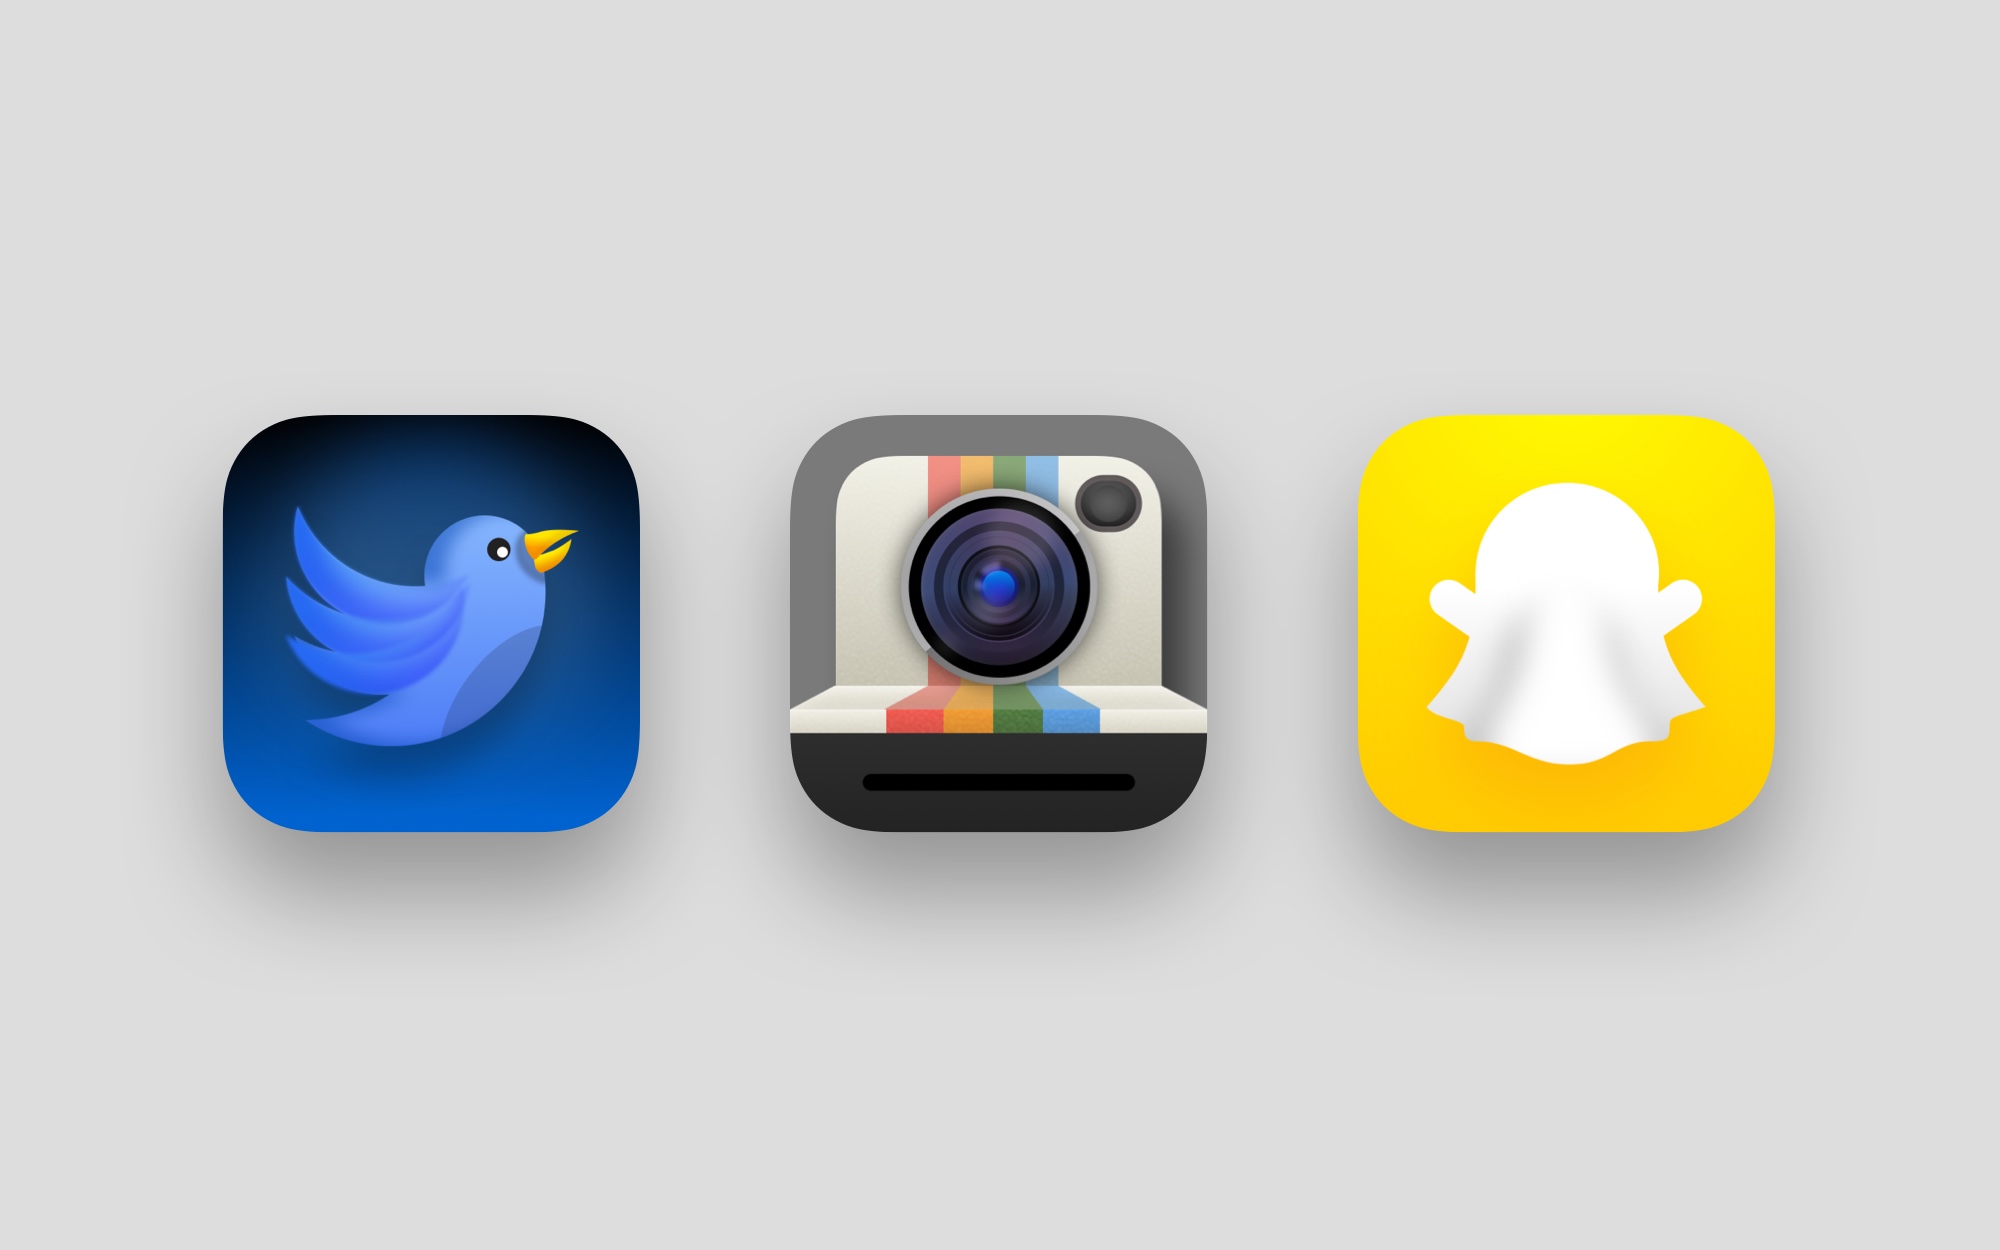 The social media icons in the textured themes.